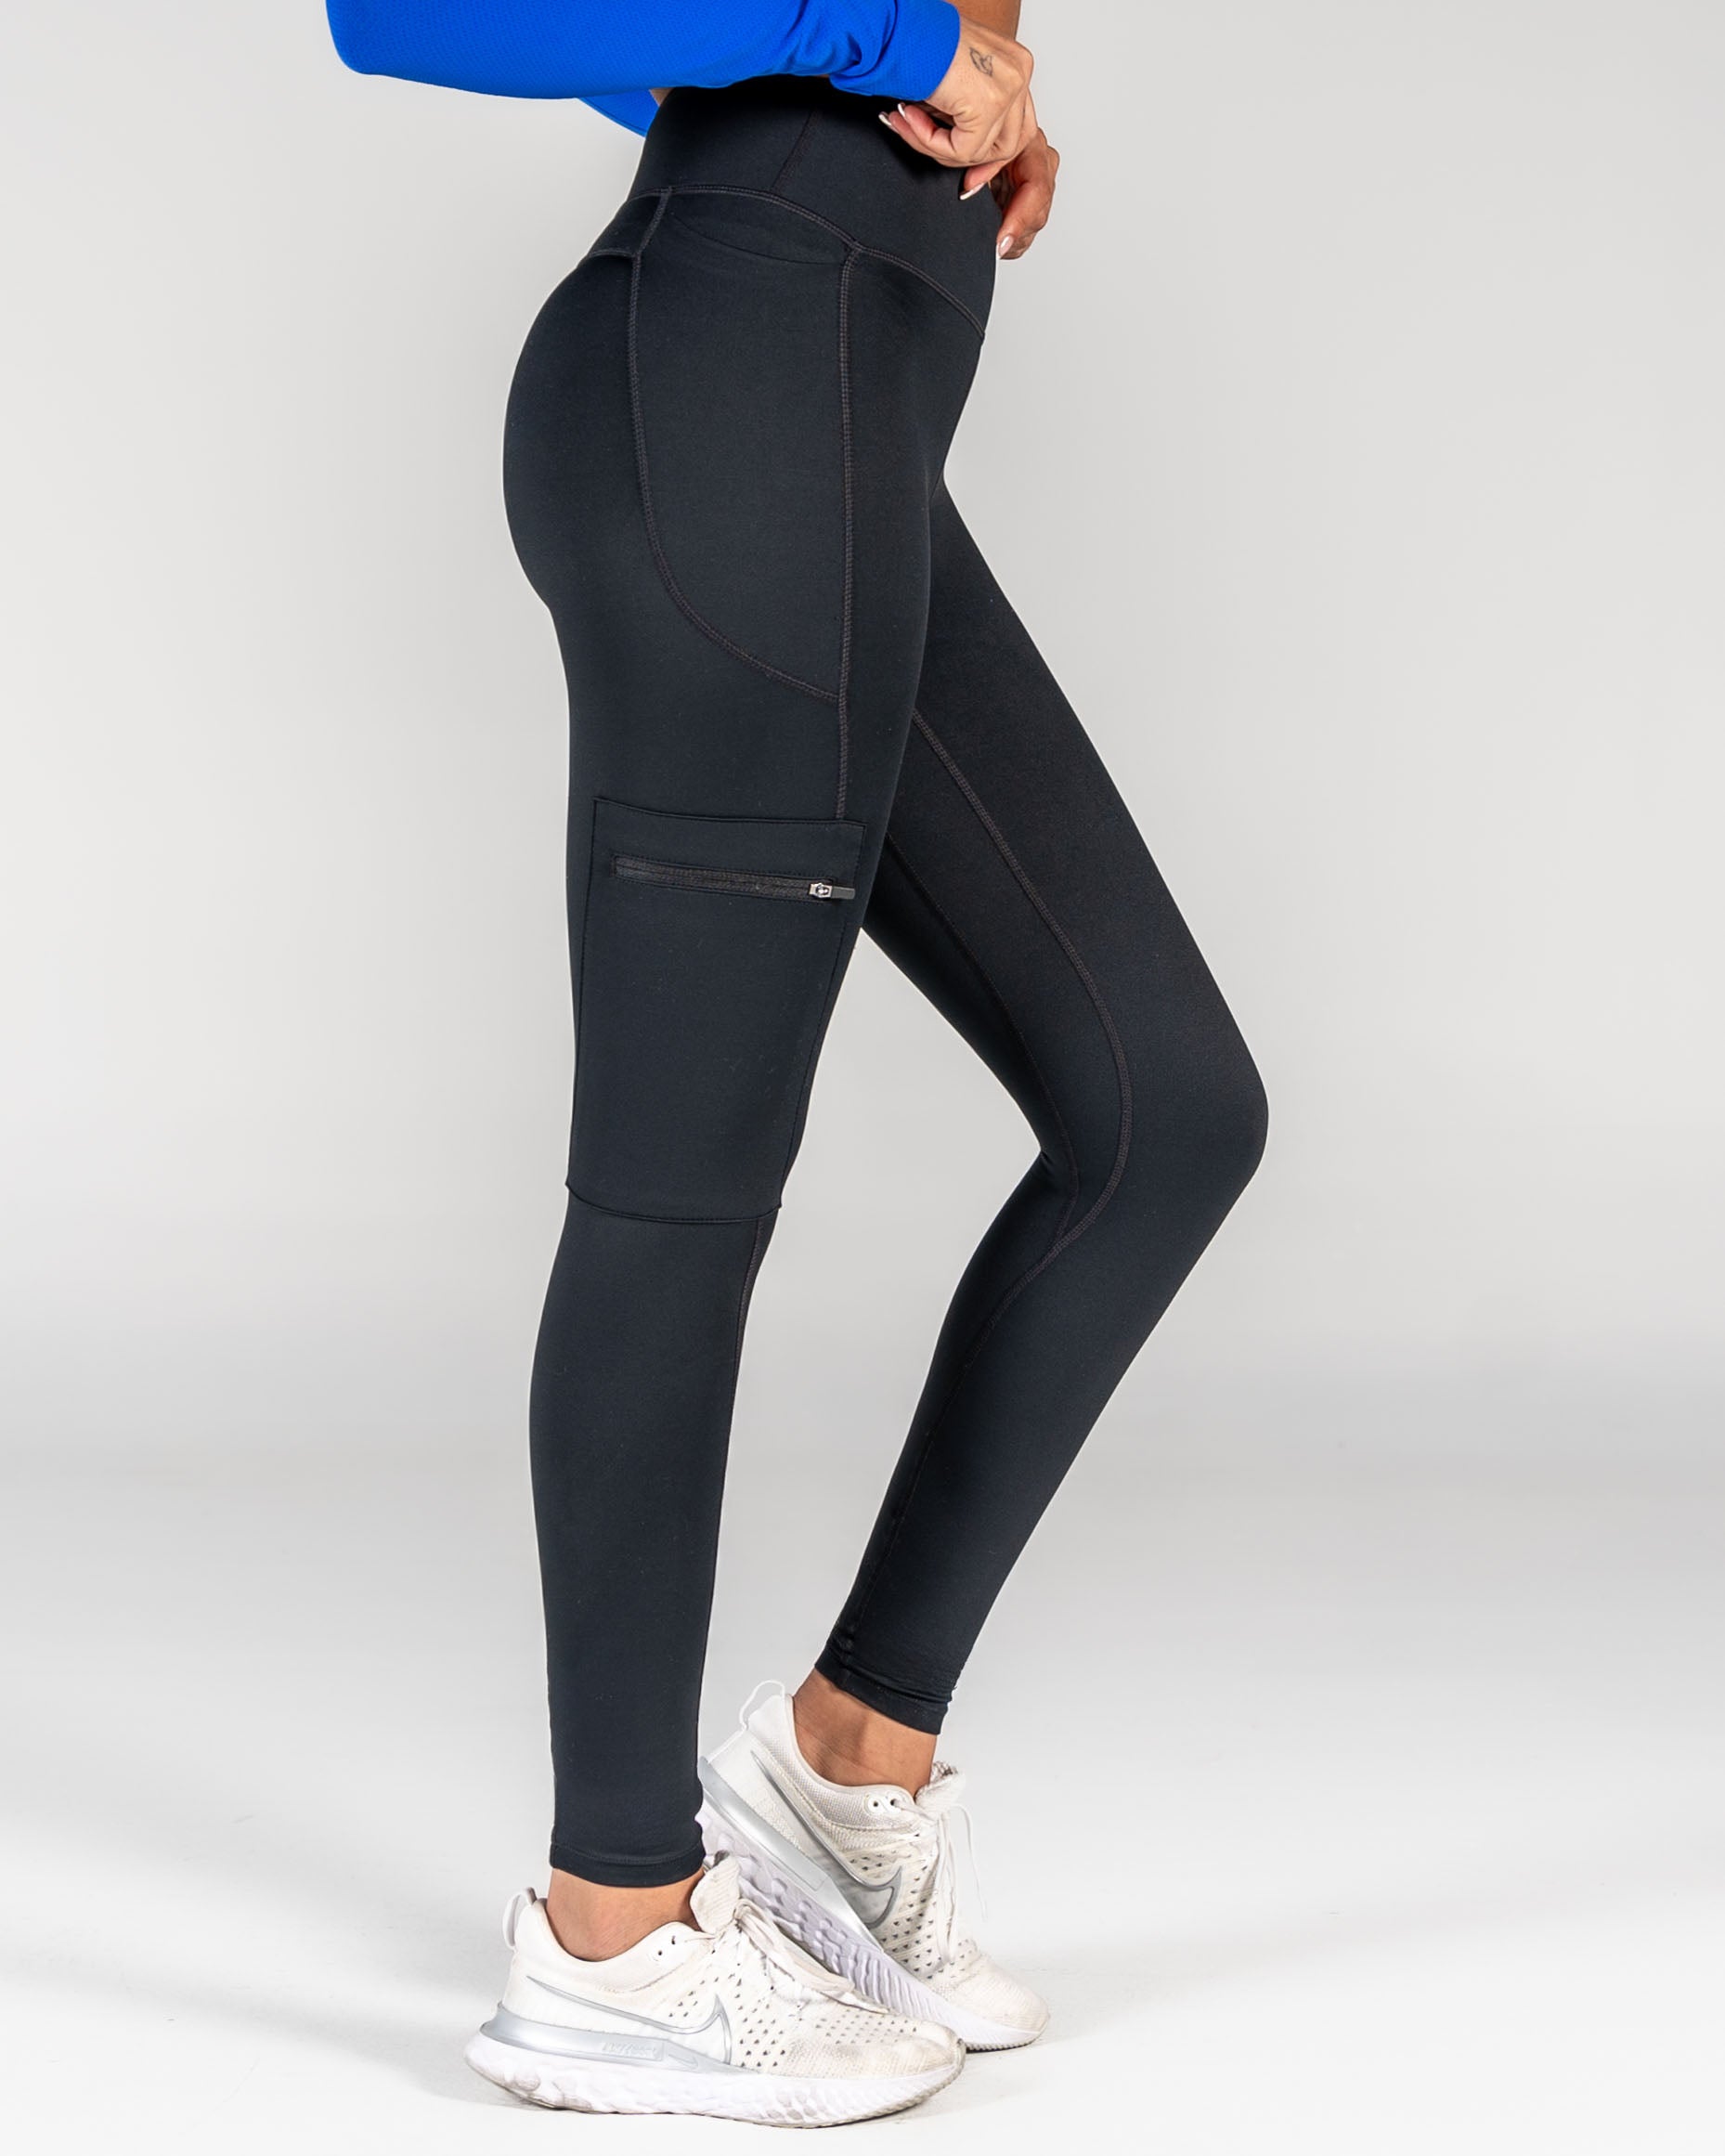 Cargo Capris Compression Leggings with Side Pockets